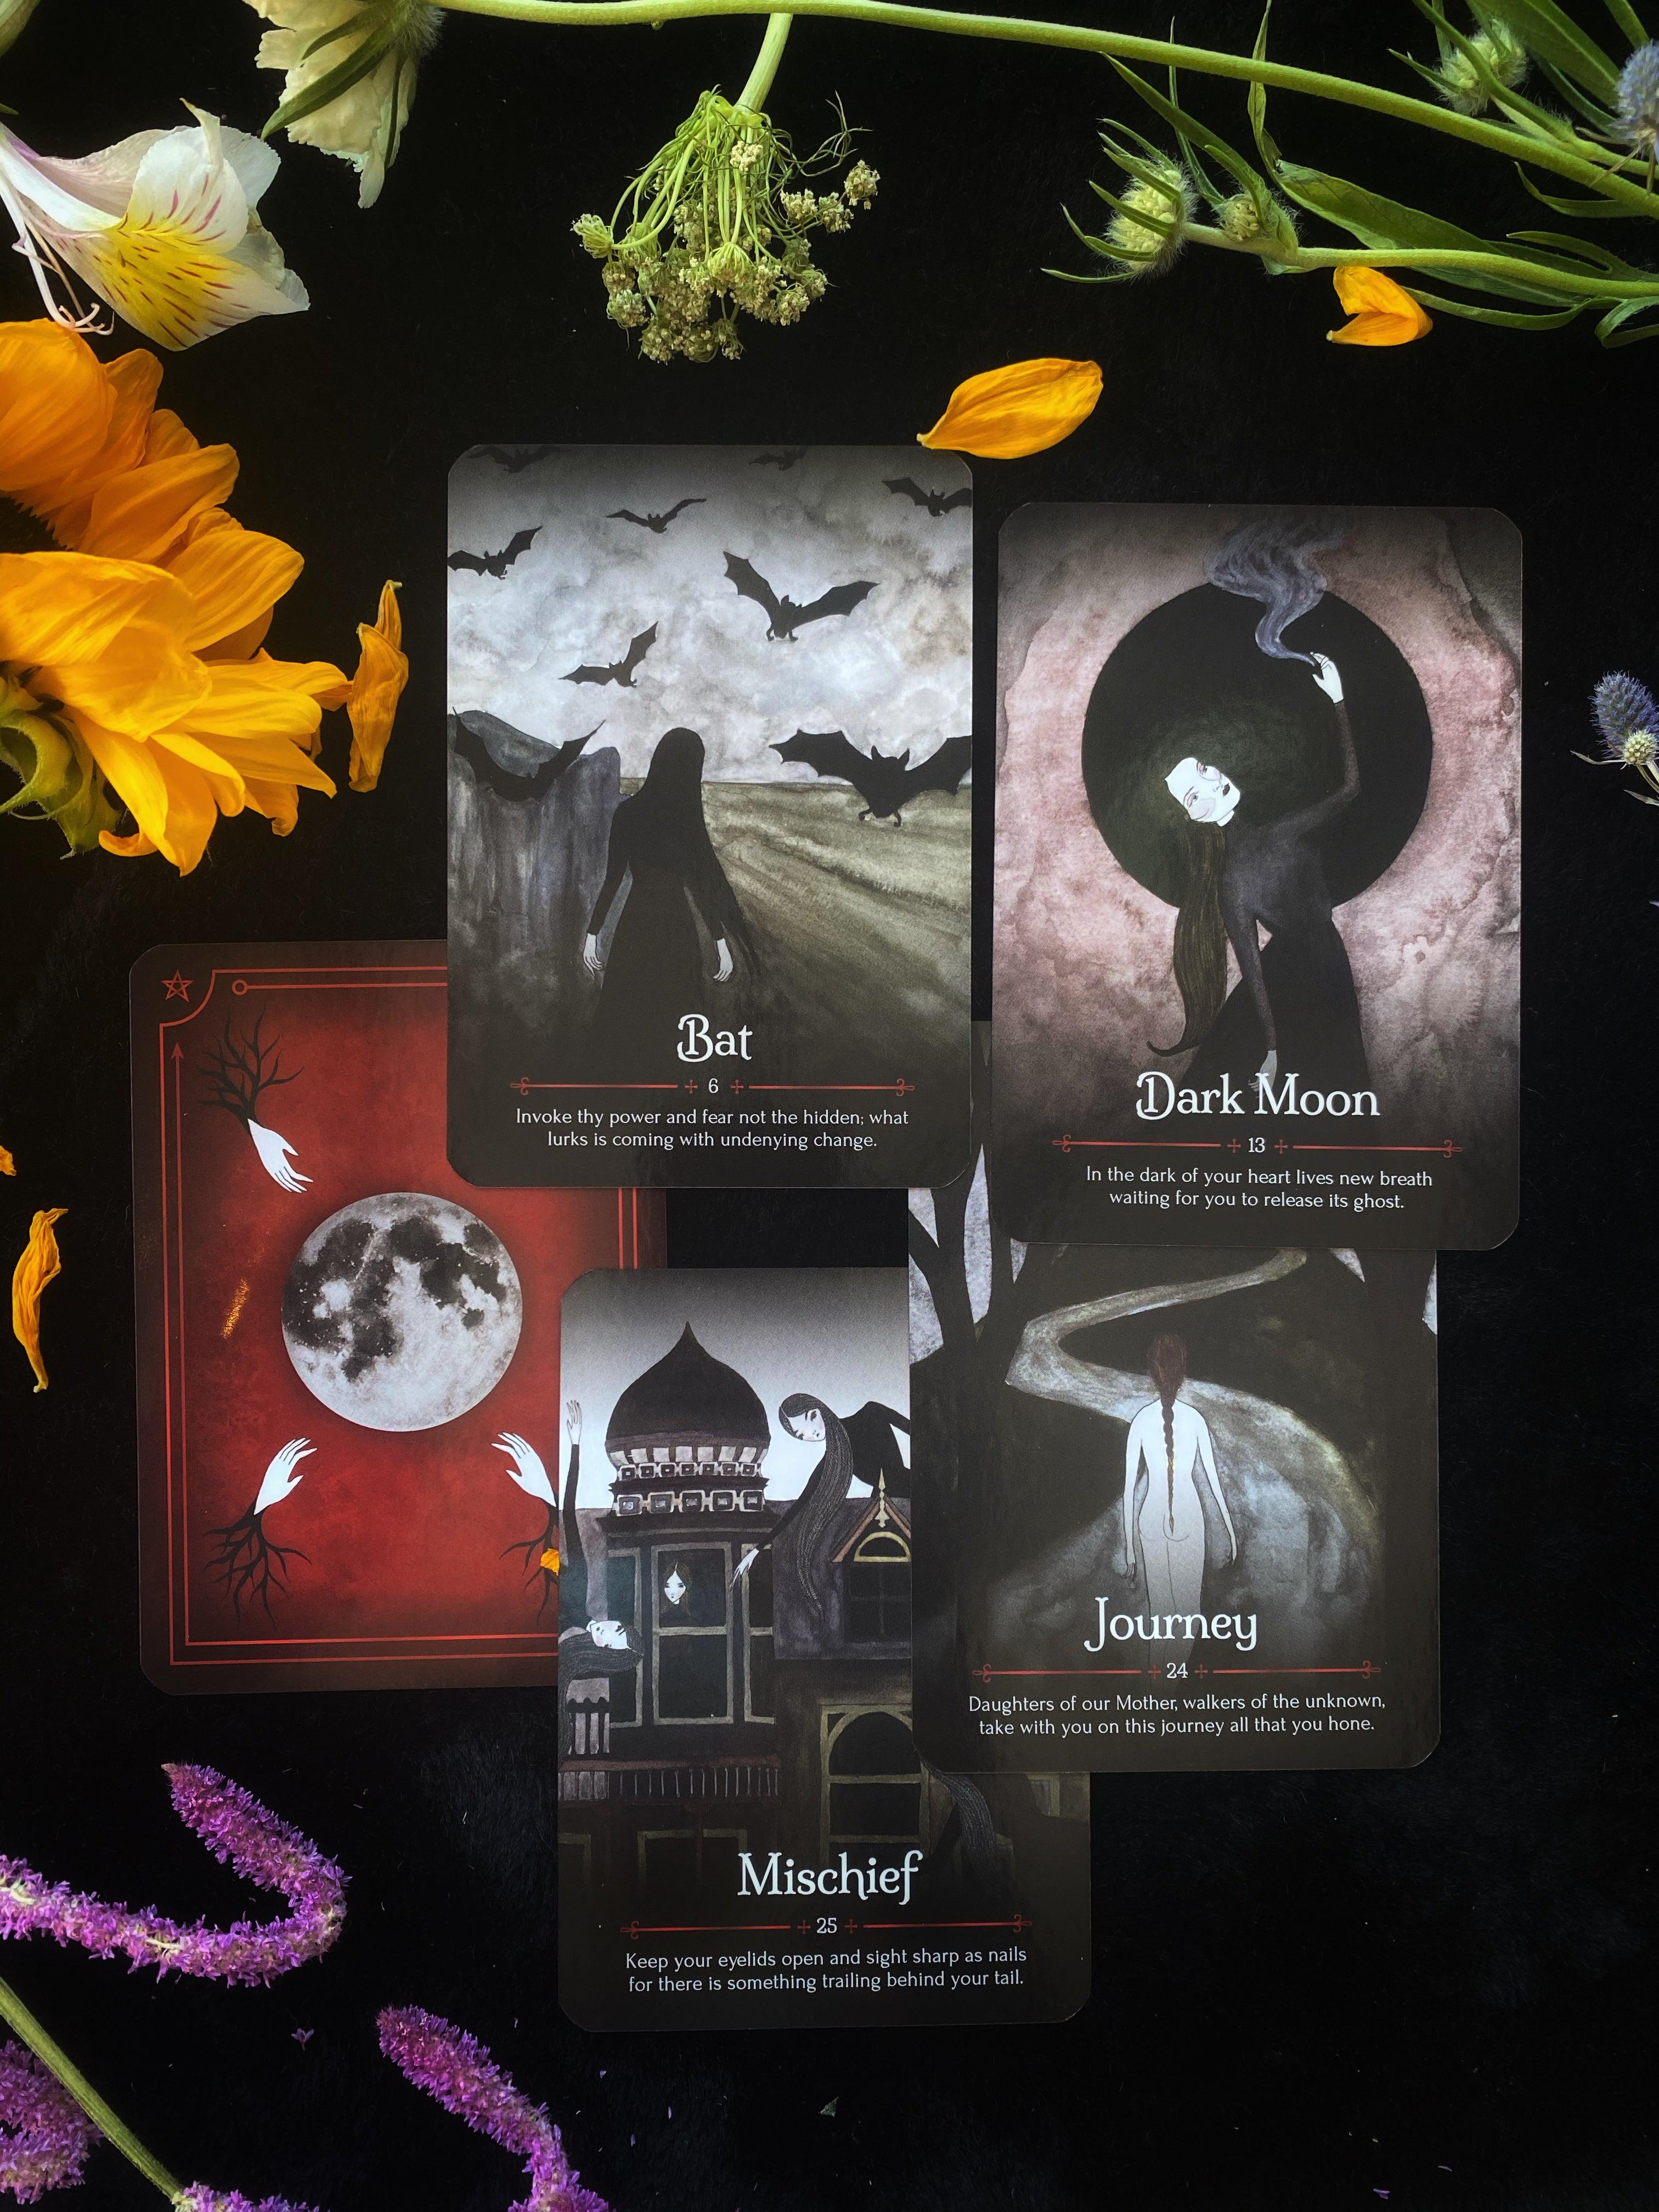 Seasons of the Witch: Samhain Oracle: Harness the Intuitive Power of the Year's Most Magical Night - Keven Craft Rituals